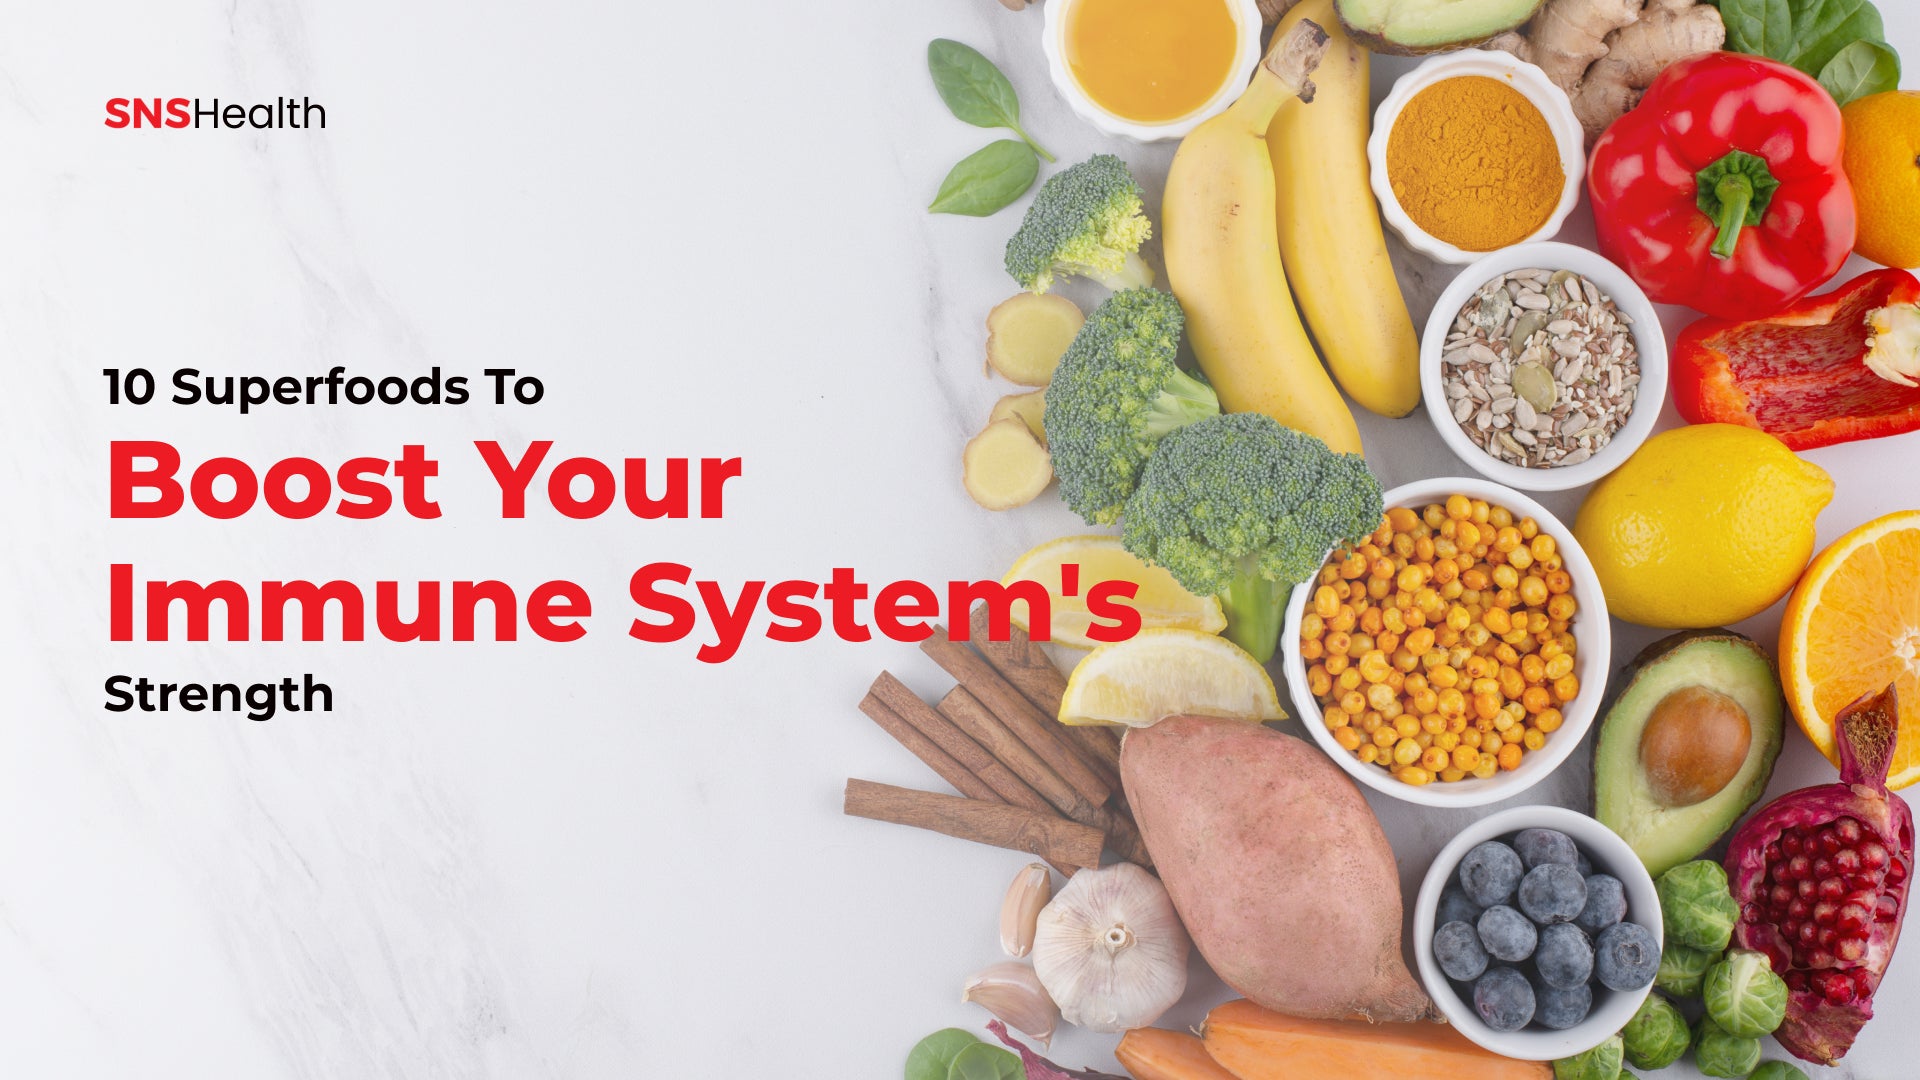 10 superfoods to boost your immune system's health